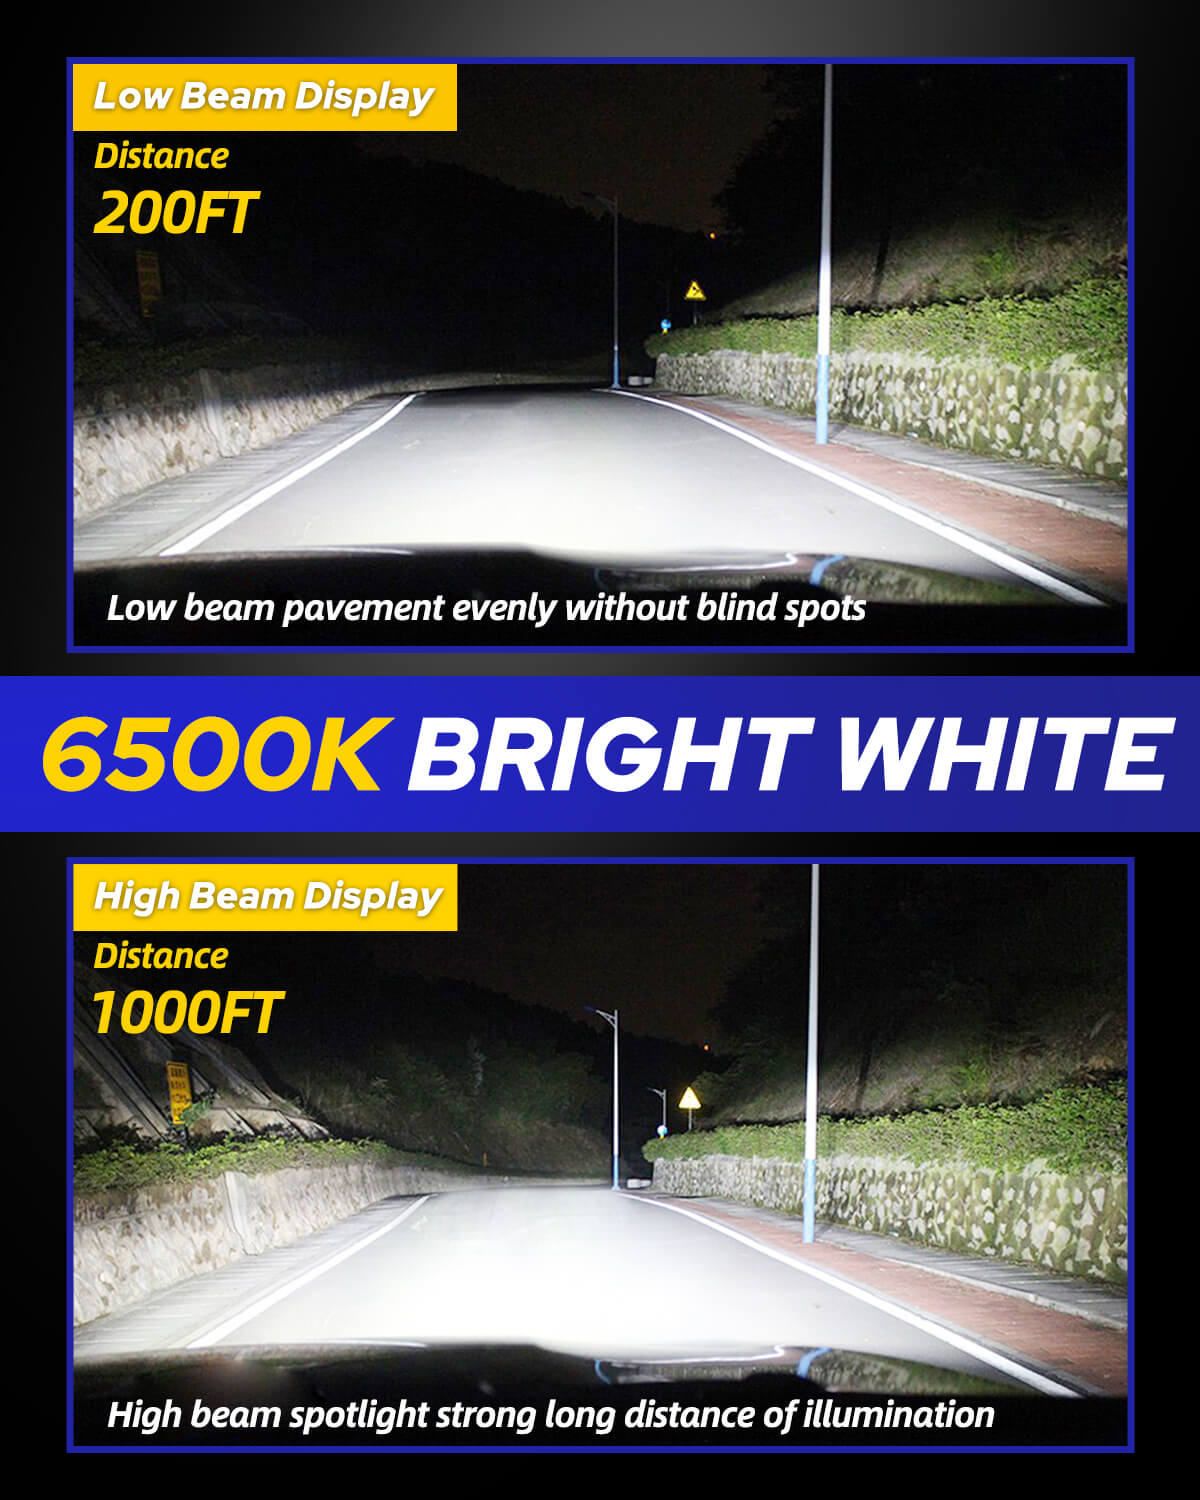 2pcs Super Bright H7 LED Headlight Bulbs - 18000LM 60W 6000K White - Canbus  5530 Chips - For Car, Truck & Motorcycle